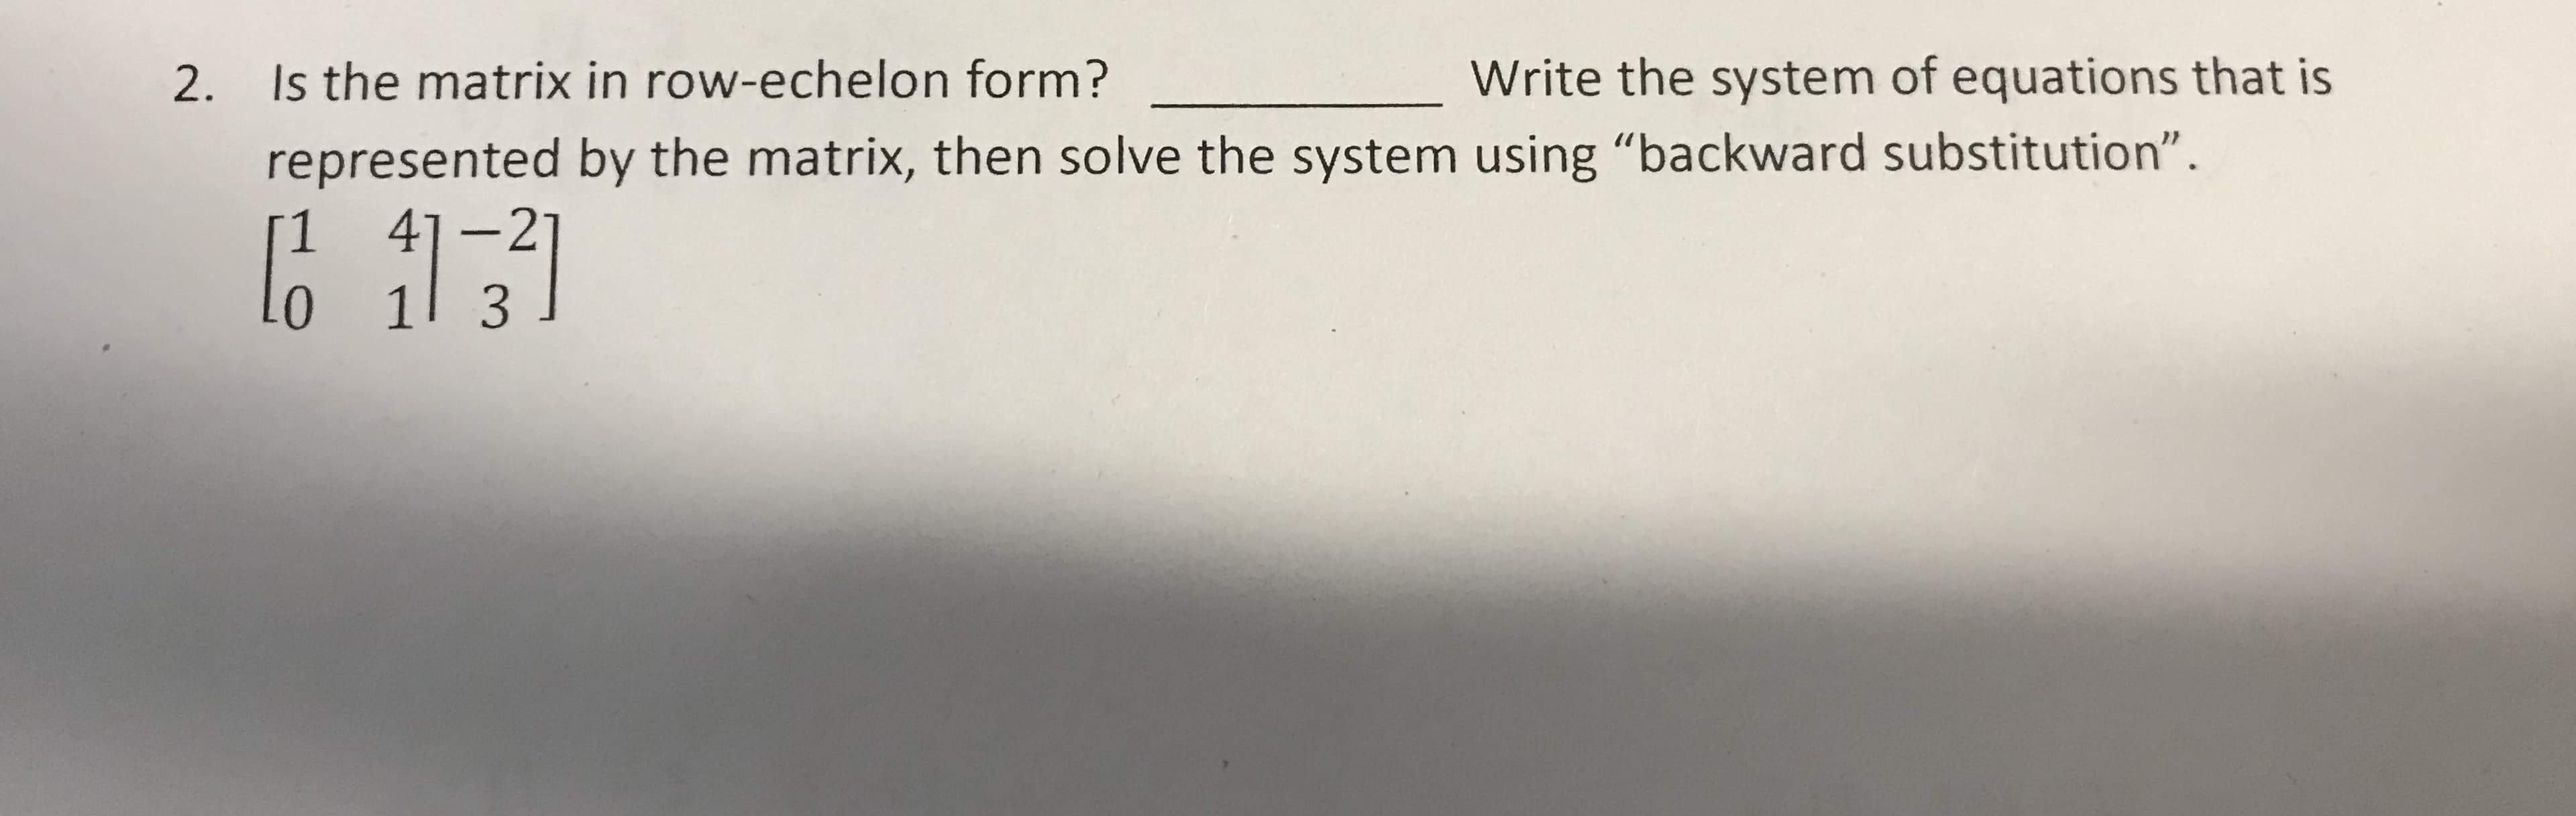 Write the system of equations that is
Is the matrix in row-echelon form?
2.
represented by the matrix, then solve the system using "backward substitution".
4]-2
1 3
